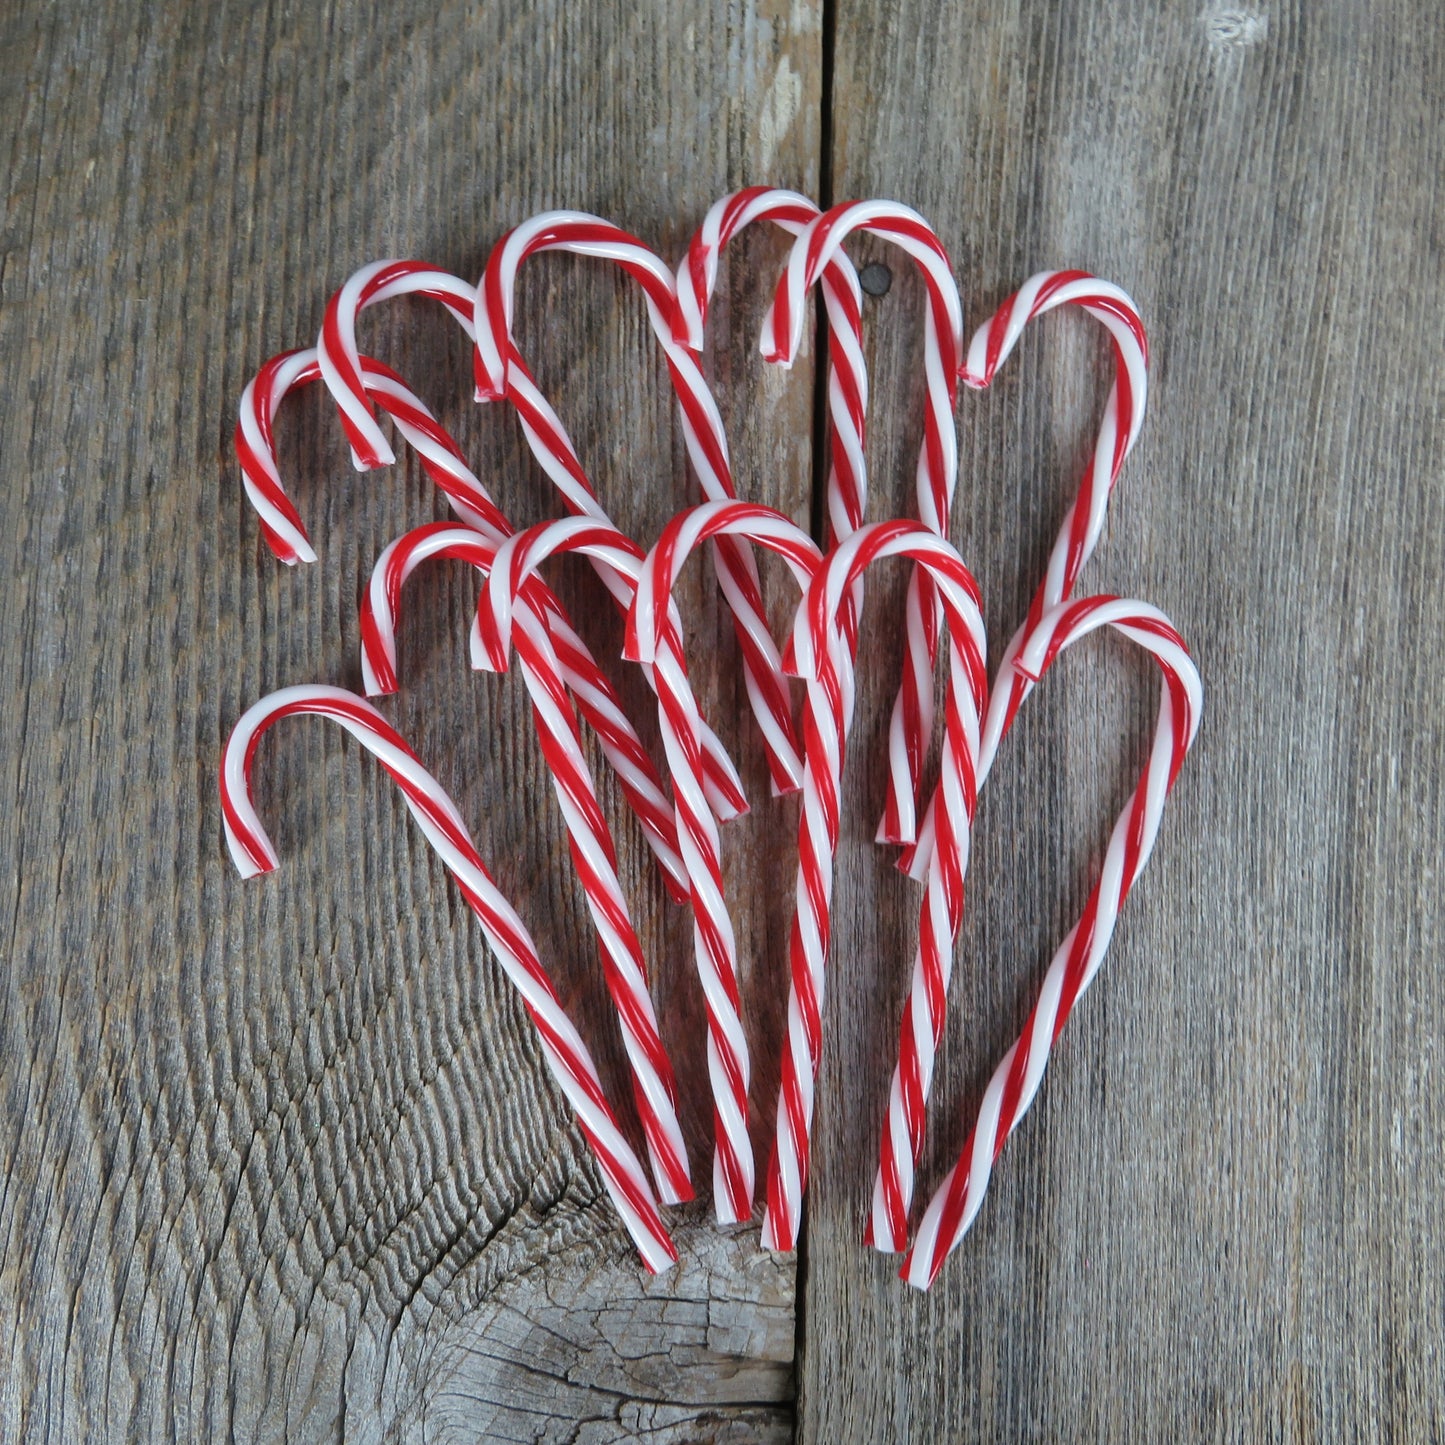 Candy Cane Christmas Embellishment Plastic Red and White Twisted Craft Ornament Faux Hard Candy Bowl Vase Filler